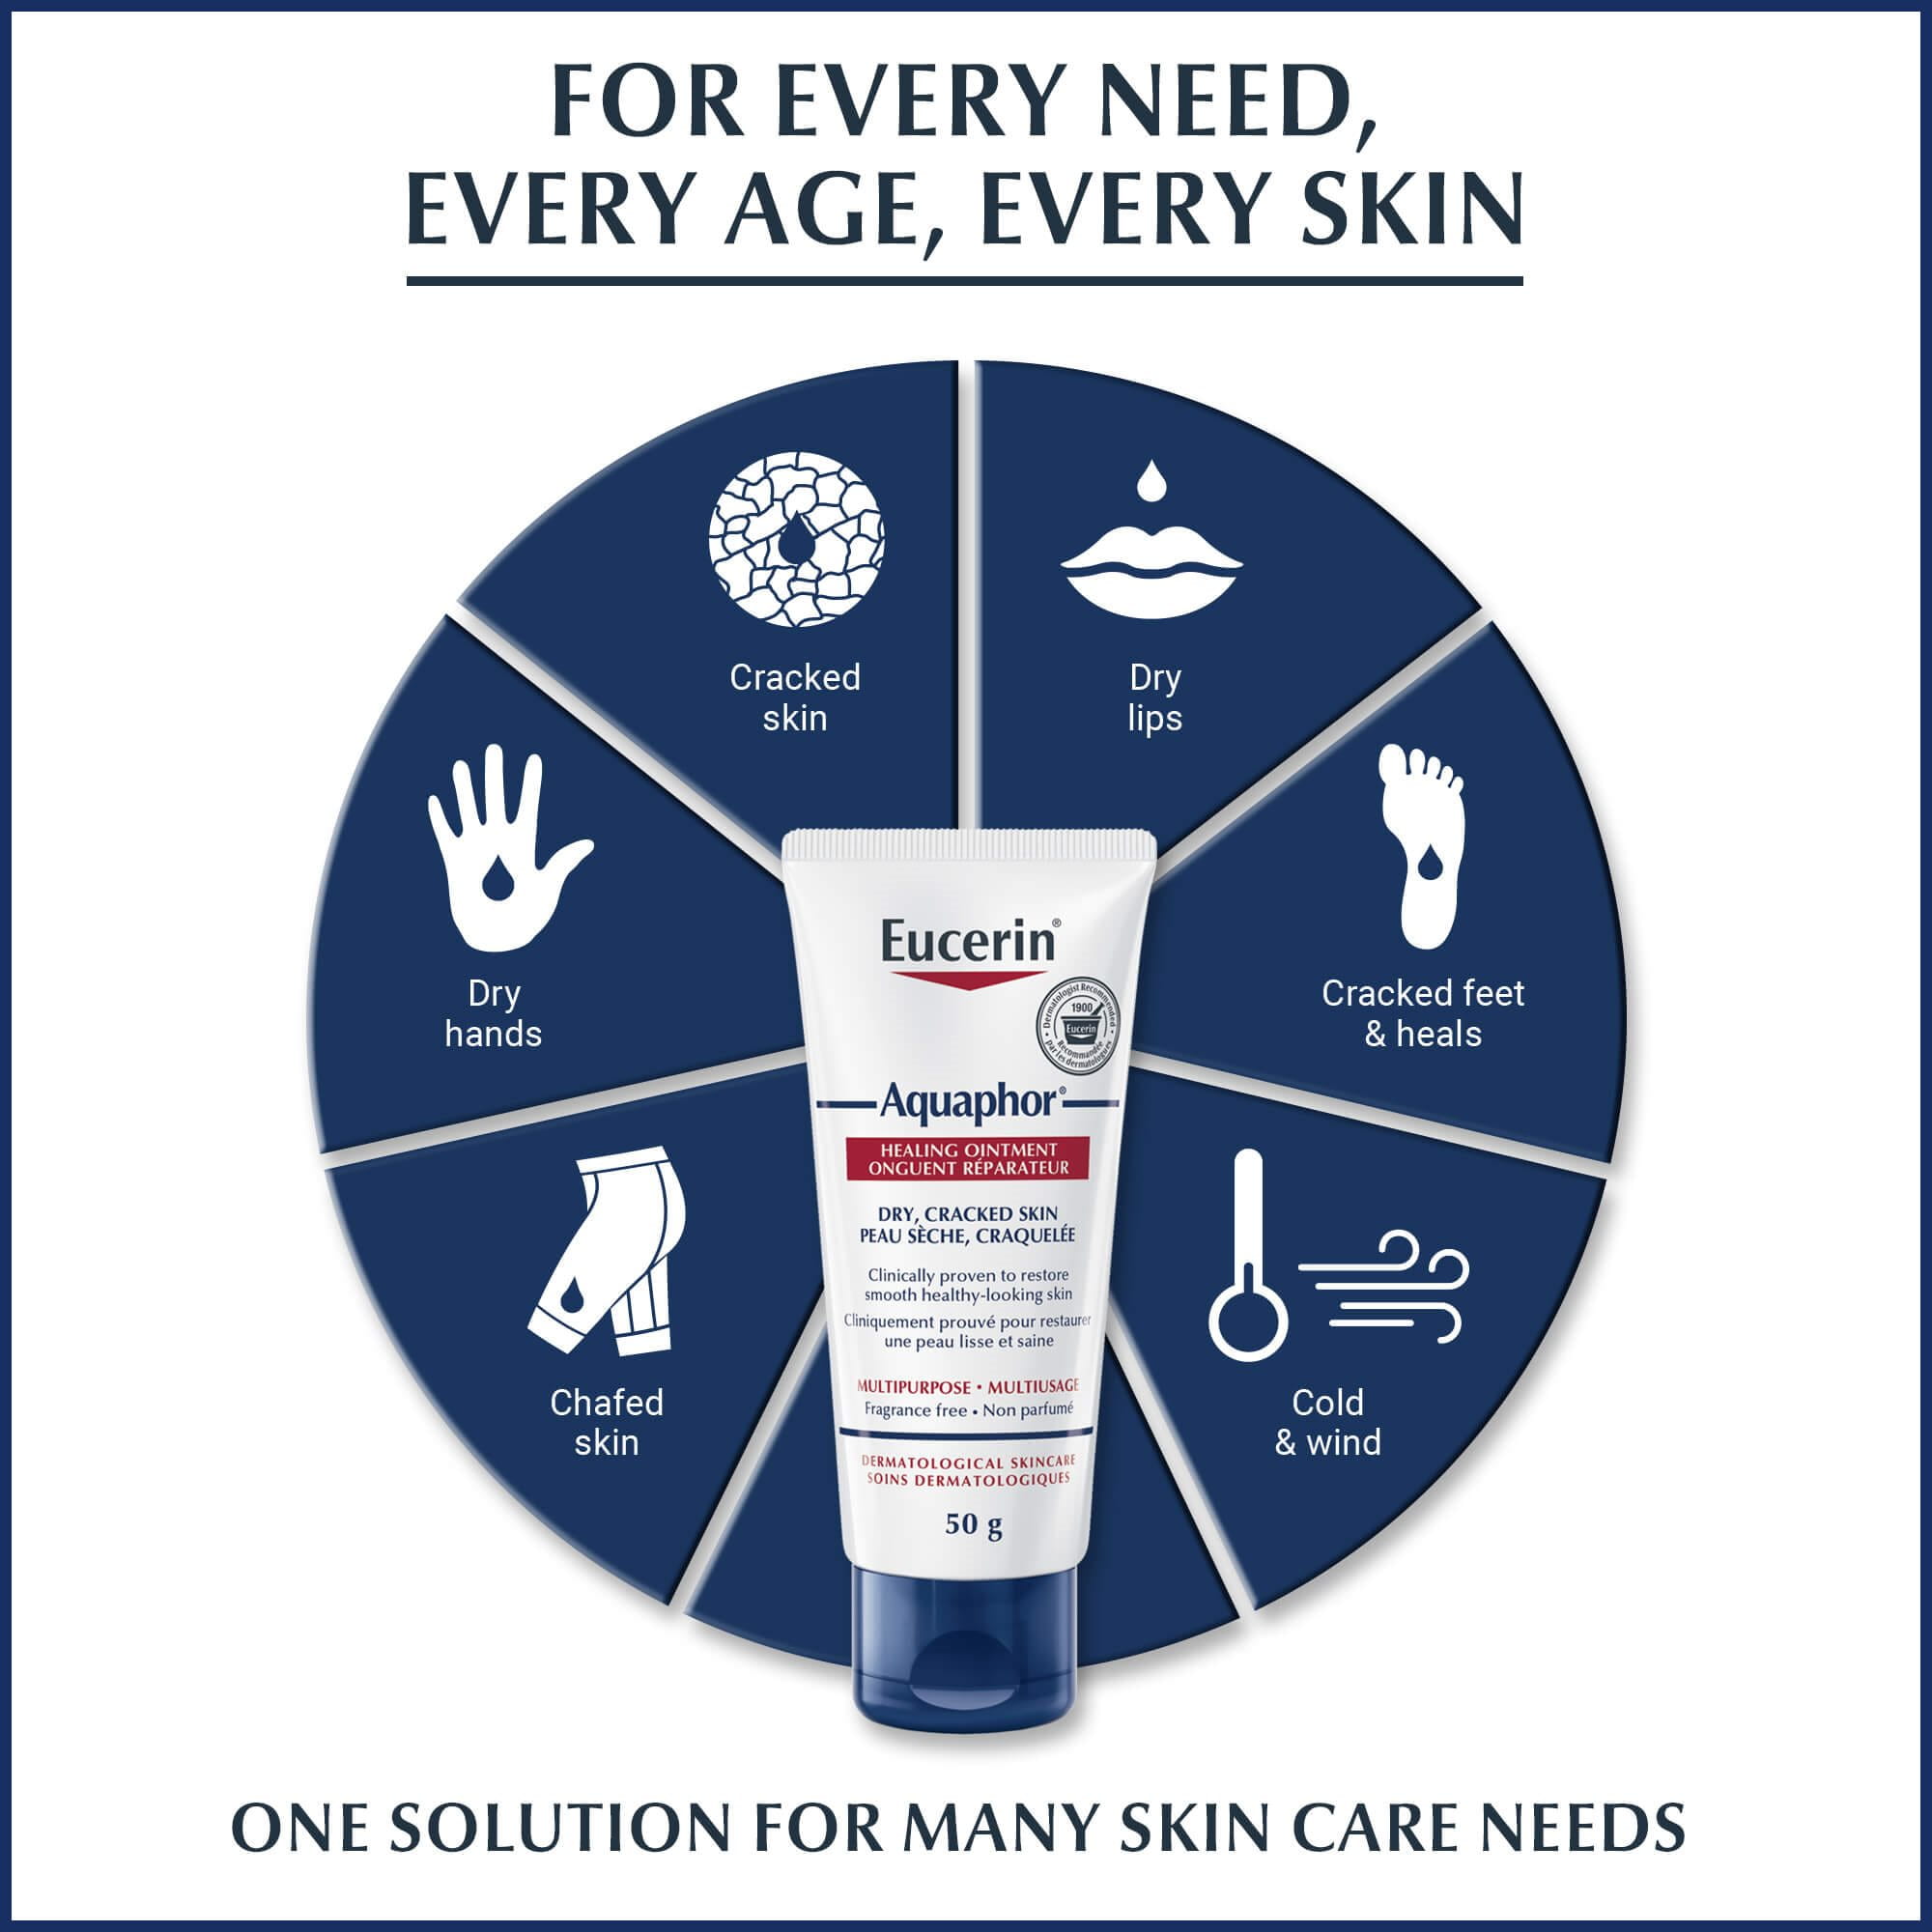 Eucerin Aquaphor healing ointment tube against a wheel showing product uses, such as cracked skin, dry lips, cracked feet and heels, chafed skin,etc.